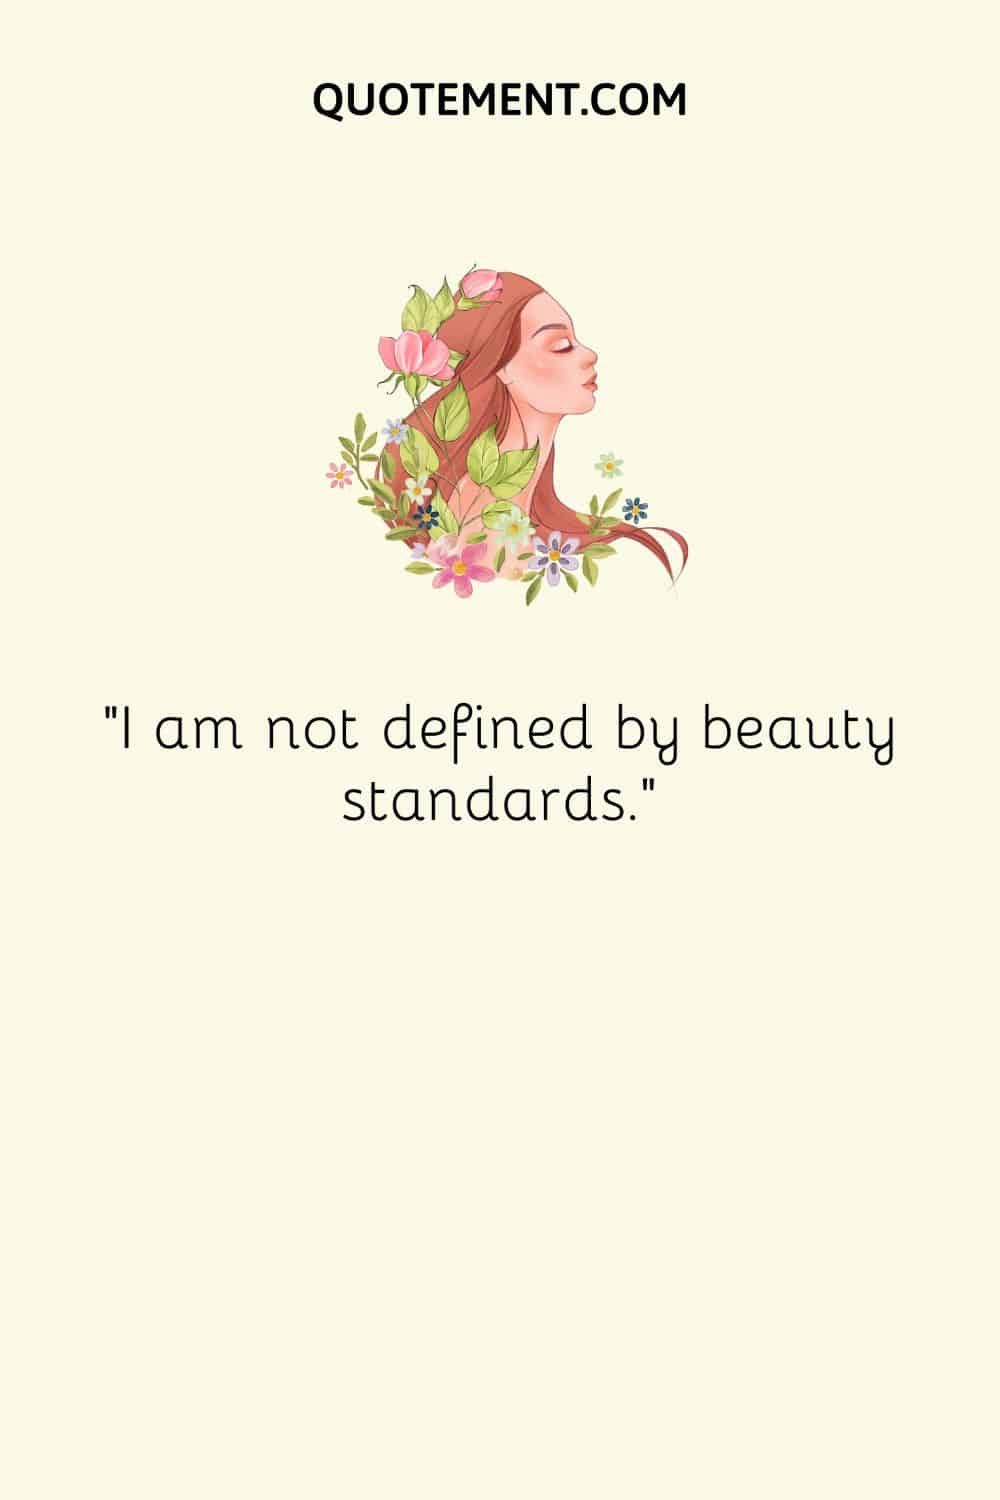 I am not defined by beauty standards